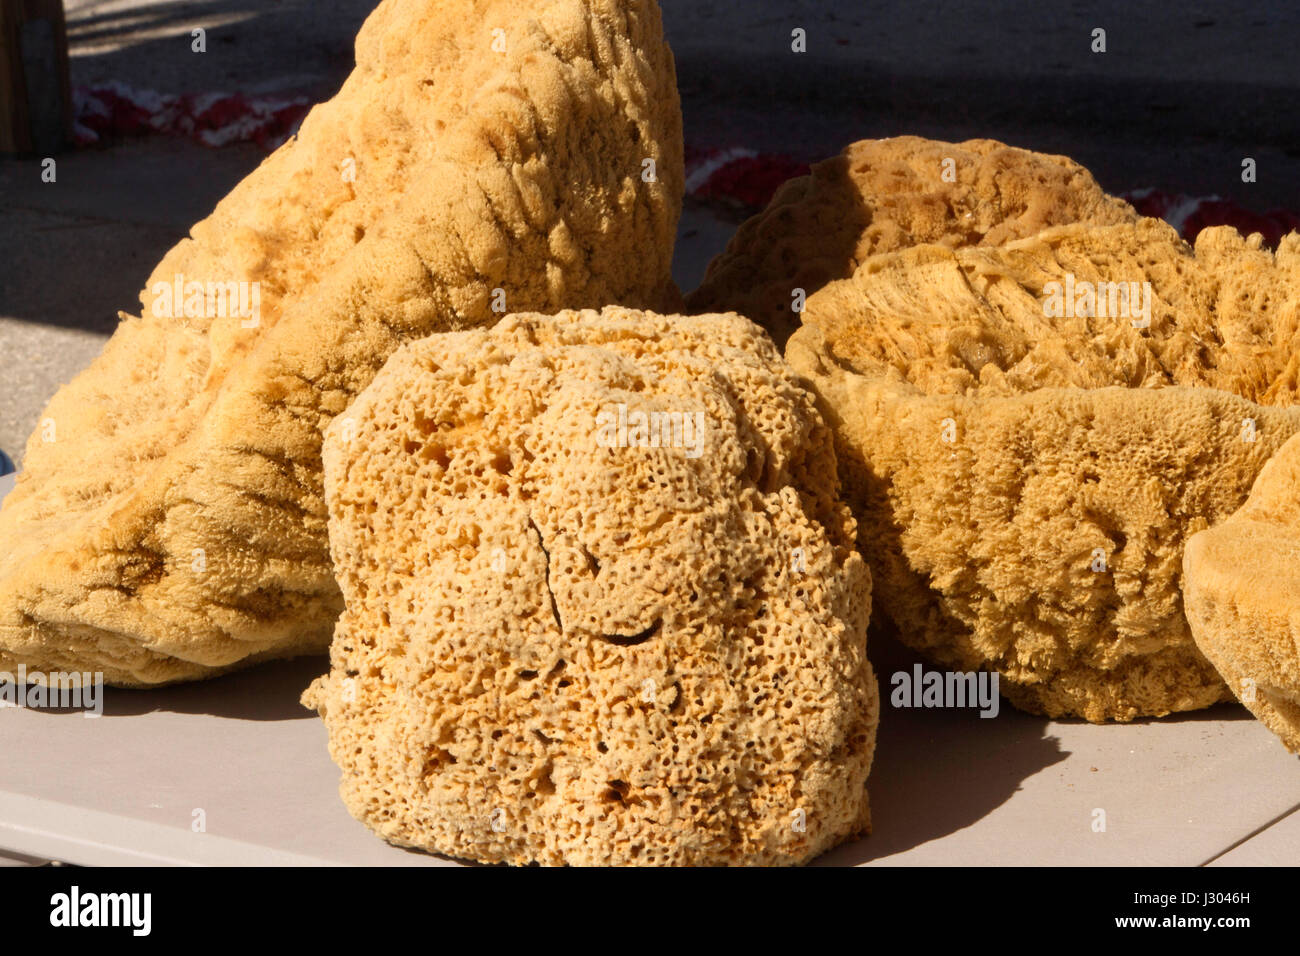 Natural sea sponges, multicellular parazoan organisms with porous bodies filled with channels that enable water to circulate through them making them  Stock Photo